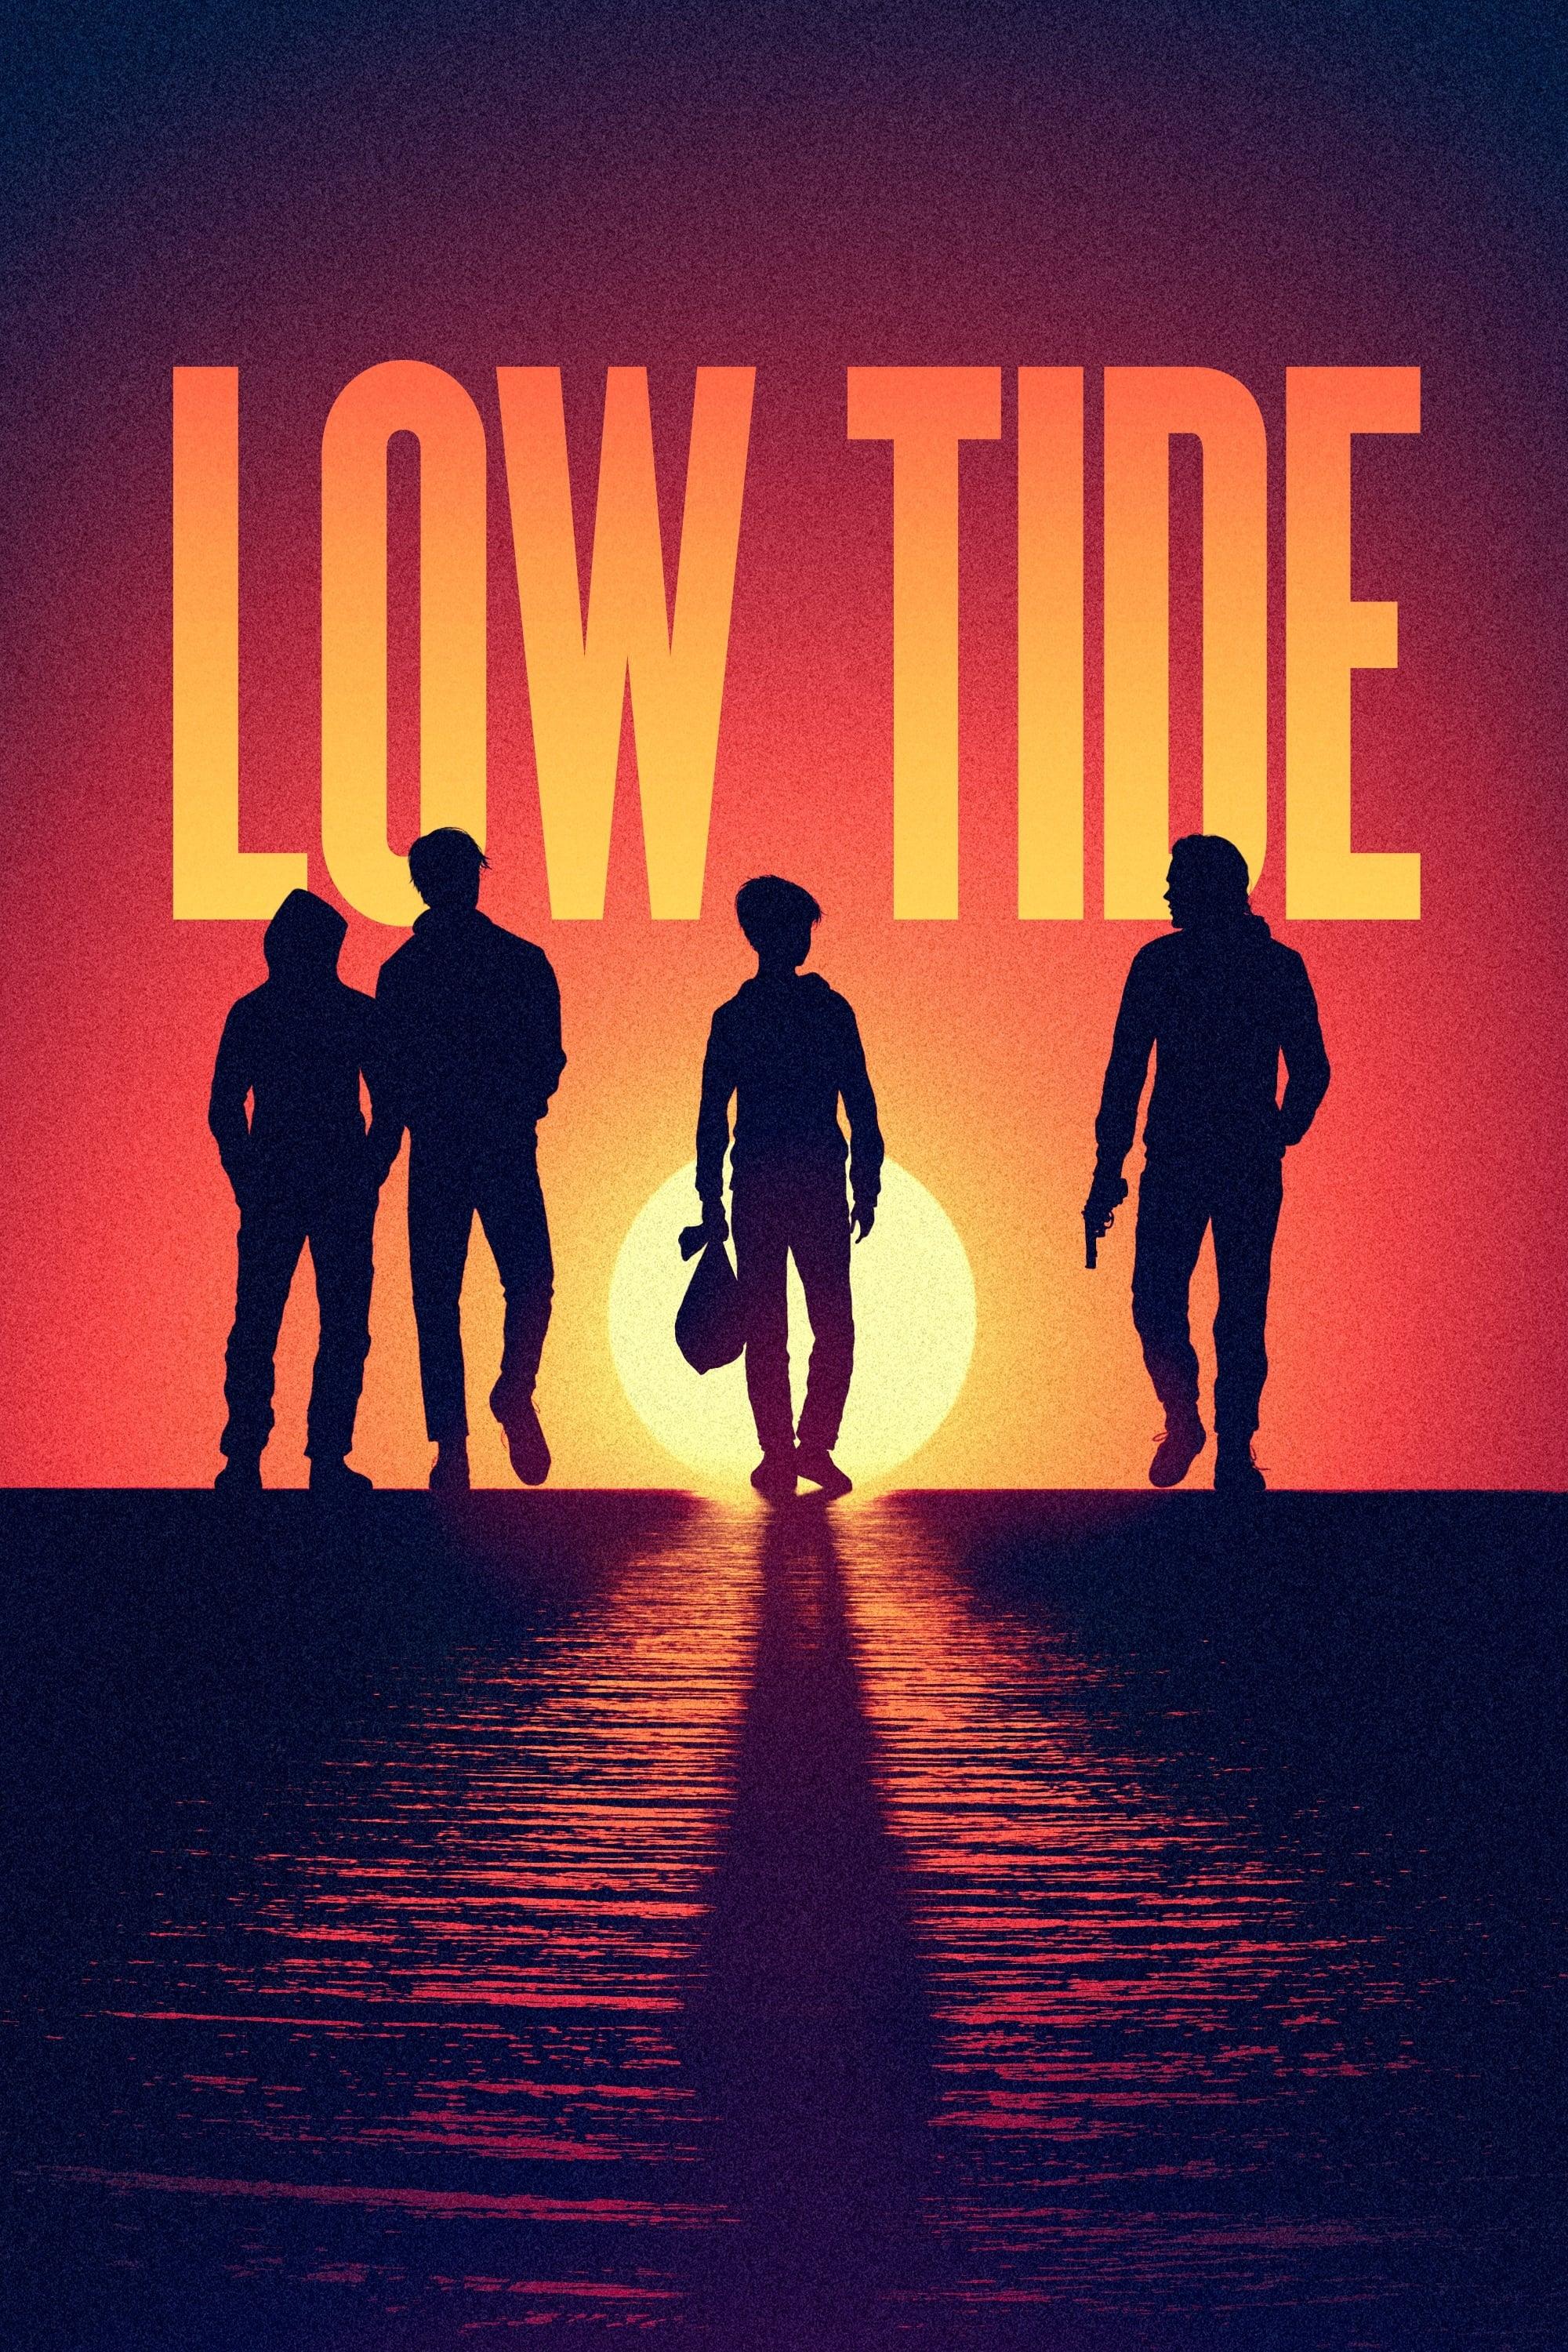 Low Tide poster